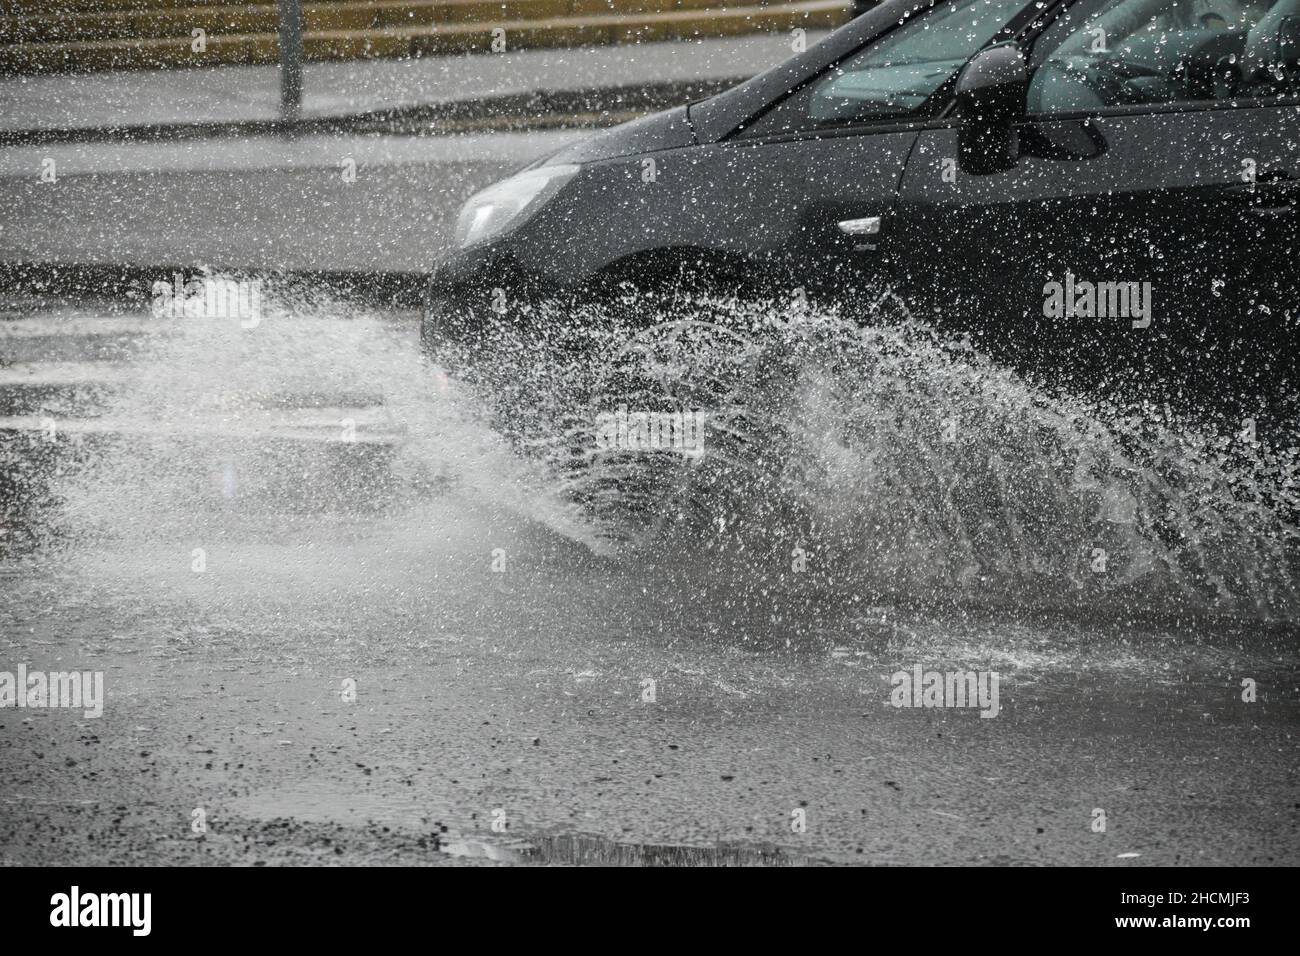 Bantry, West Cork, Ireland. 130h Dec, 2021. Met Eireann has issued a yellow weather warning for Cork, predicting heavy rain that will lead to localised flooding. Credit: Karlis Dzjamko News/Alamy Live News Stock Photo